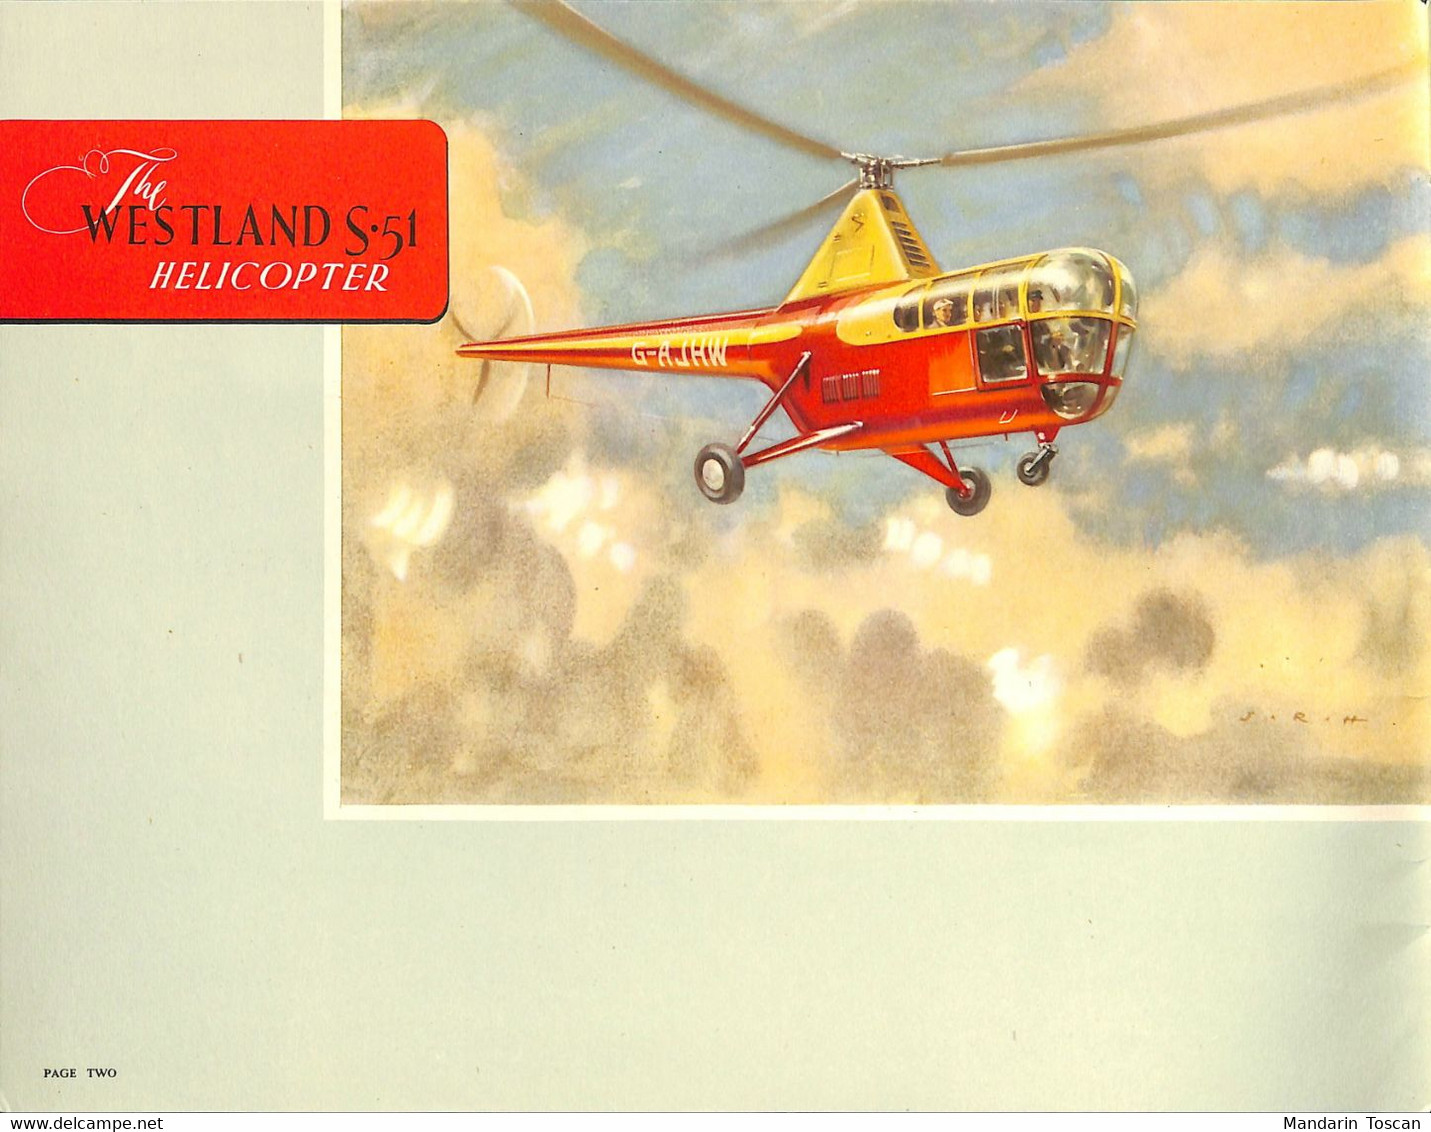 Westland Helicopters And Their Developments (1955) (aviation UK) - Brits Leger